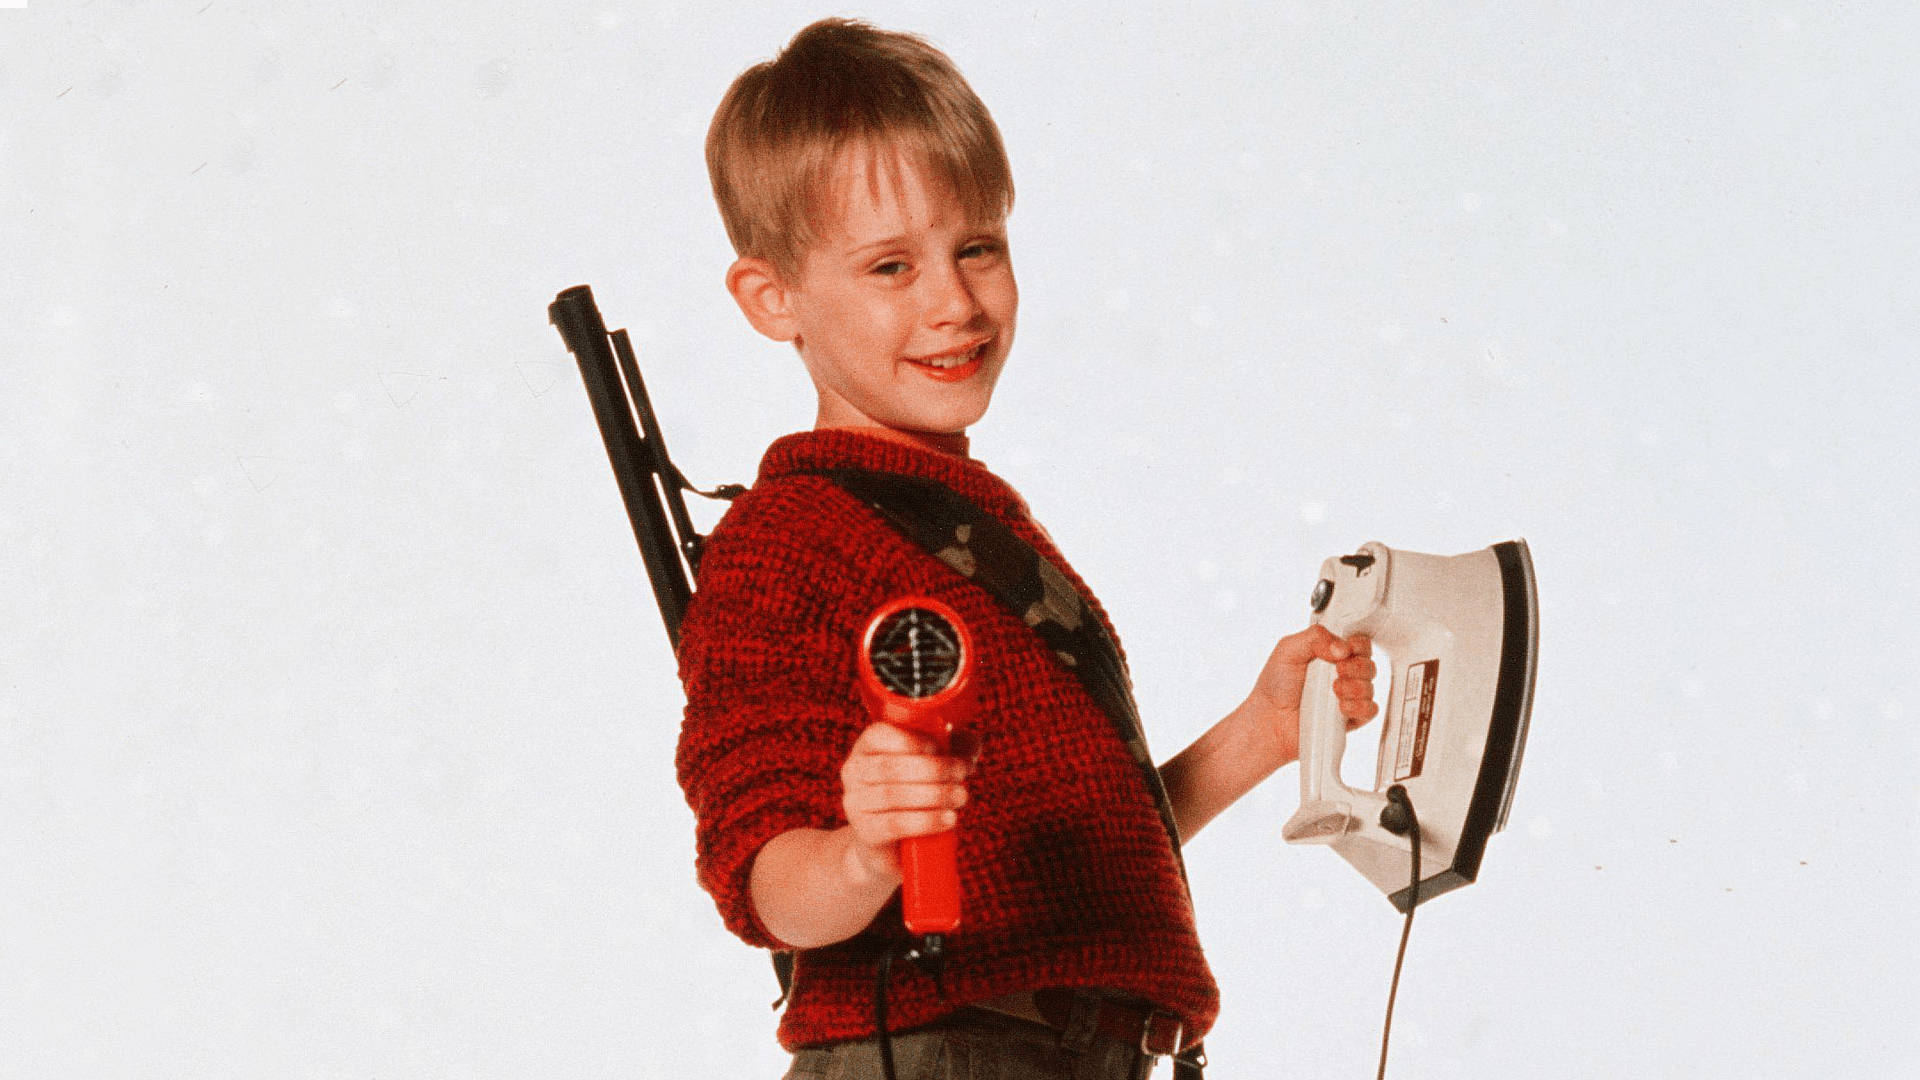 Home Alone Improvised Weapons Background